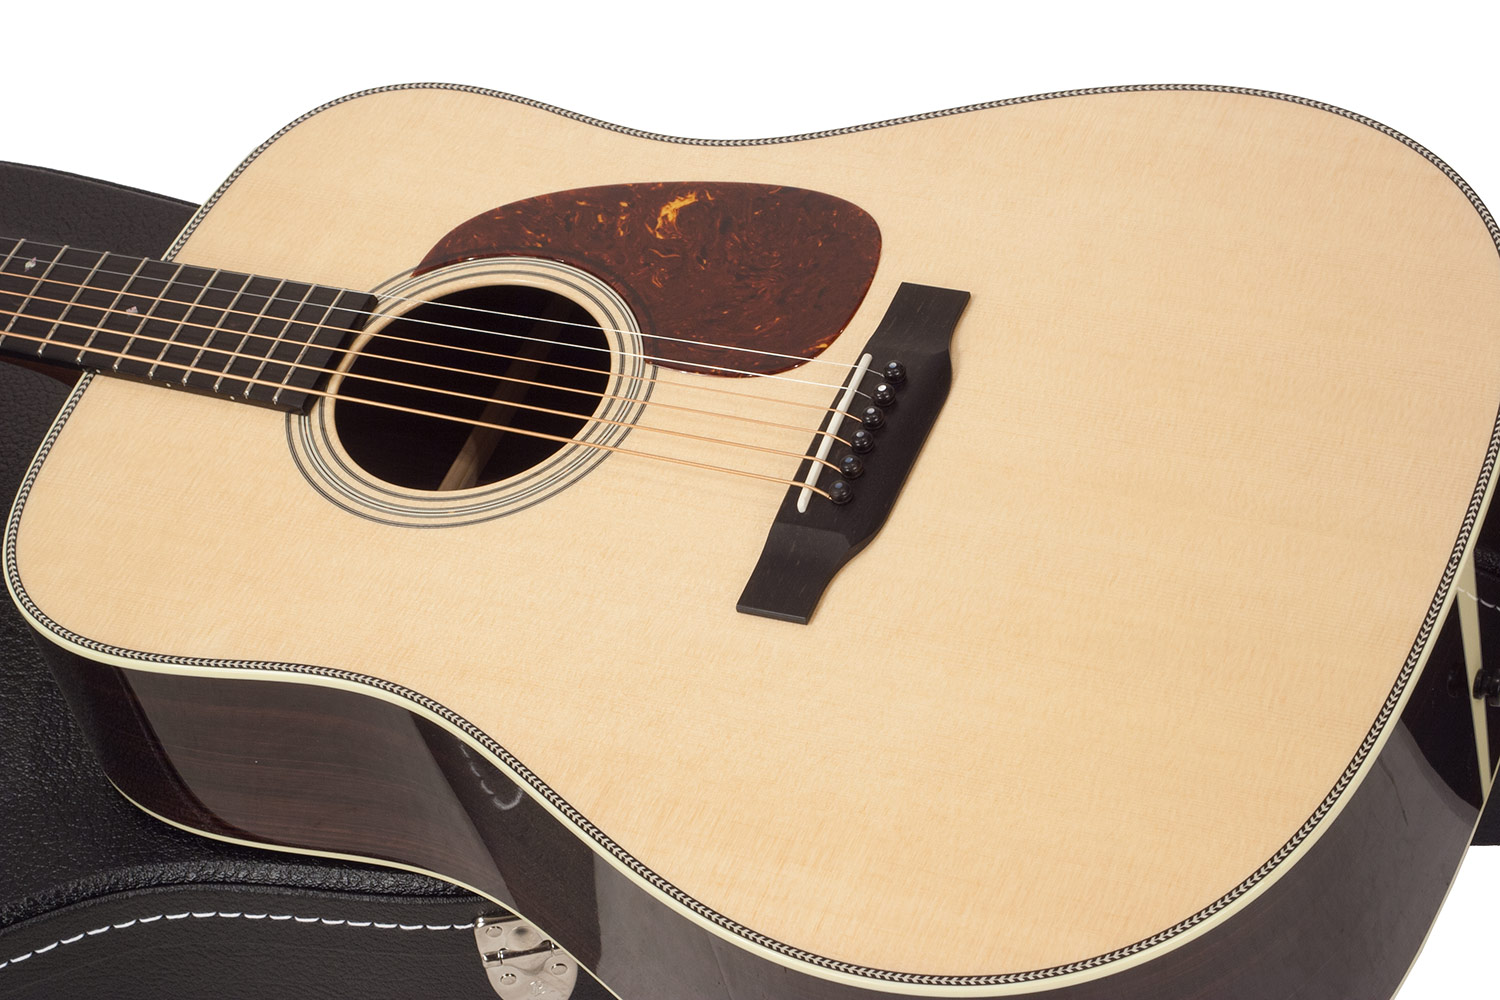 Collings D2h Custom Satin Neck, Torch Head #27113 - Natural - Westerngitarre & electro - Variation 3